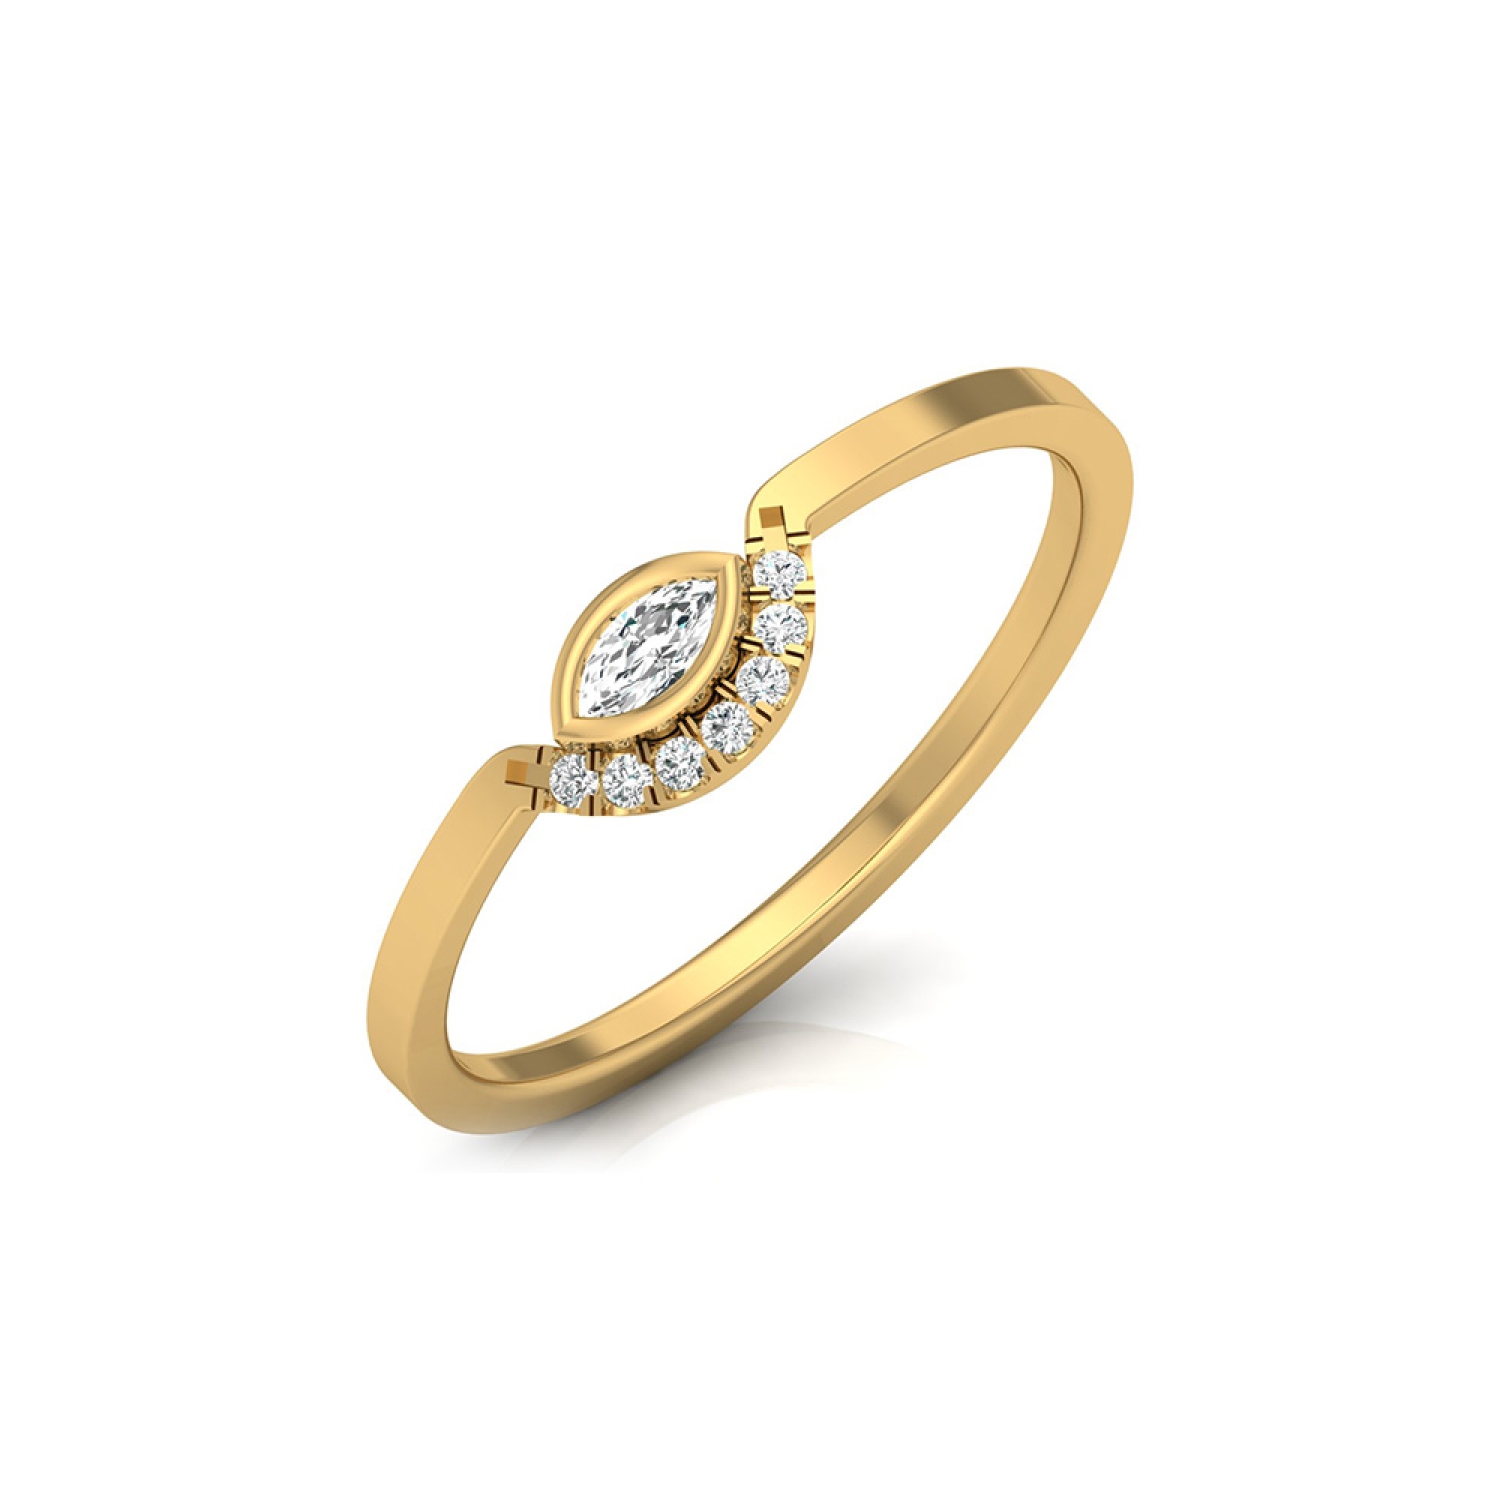 New Diamond Rings Design 💎 In Gold With Gorgeous Stones || Rings Designs.  | Diamond rings design, Stone ring design, Ring designs